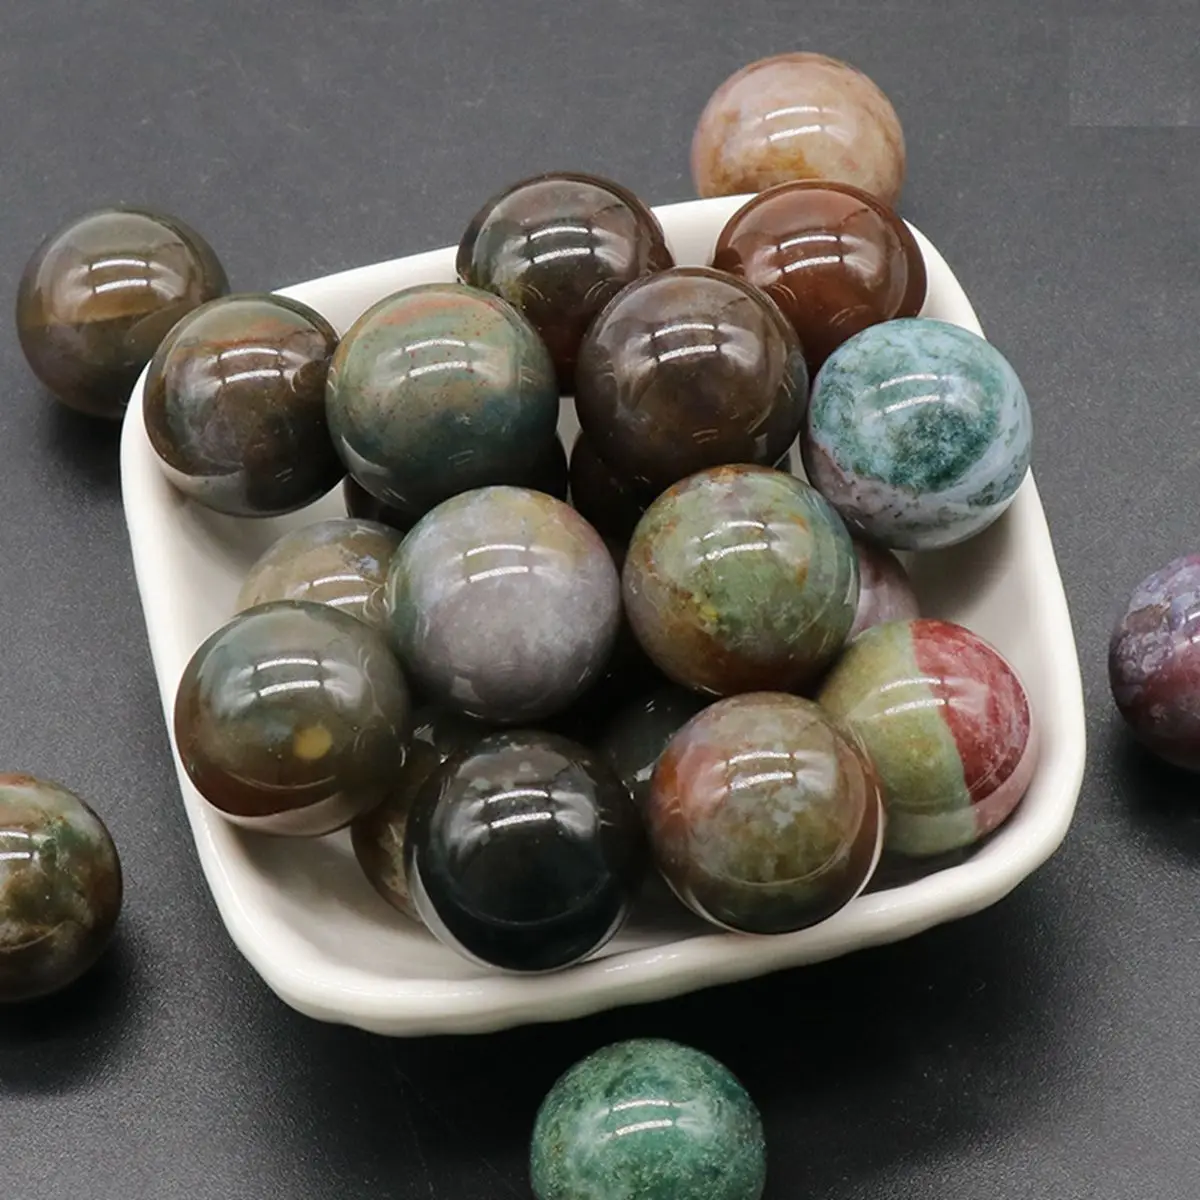 

16PCS 20MM Indian Agate Stress Relief Spheres & Balls Polished Meditation Balancing Home Decoration Crystal Beads